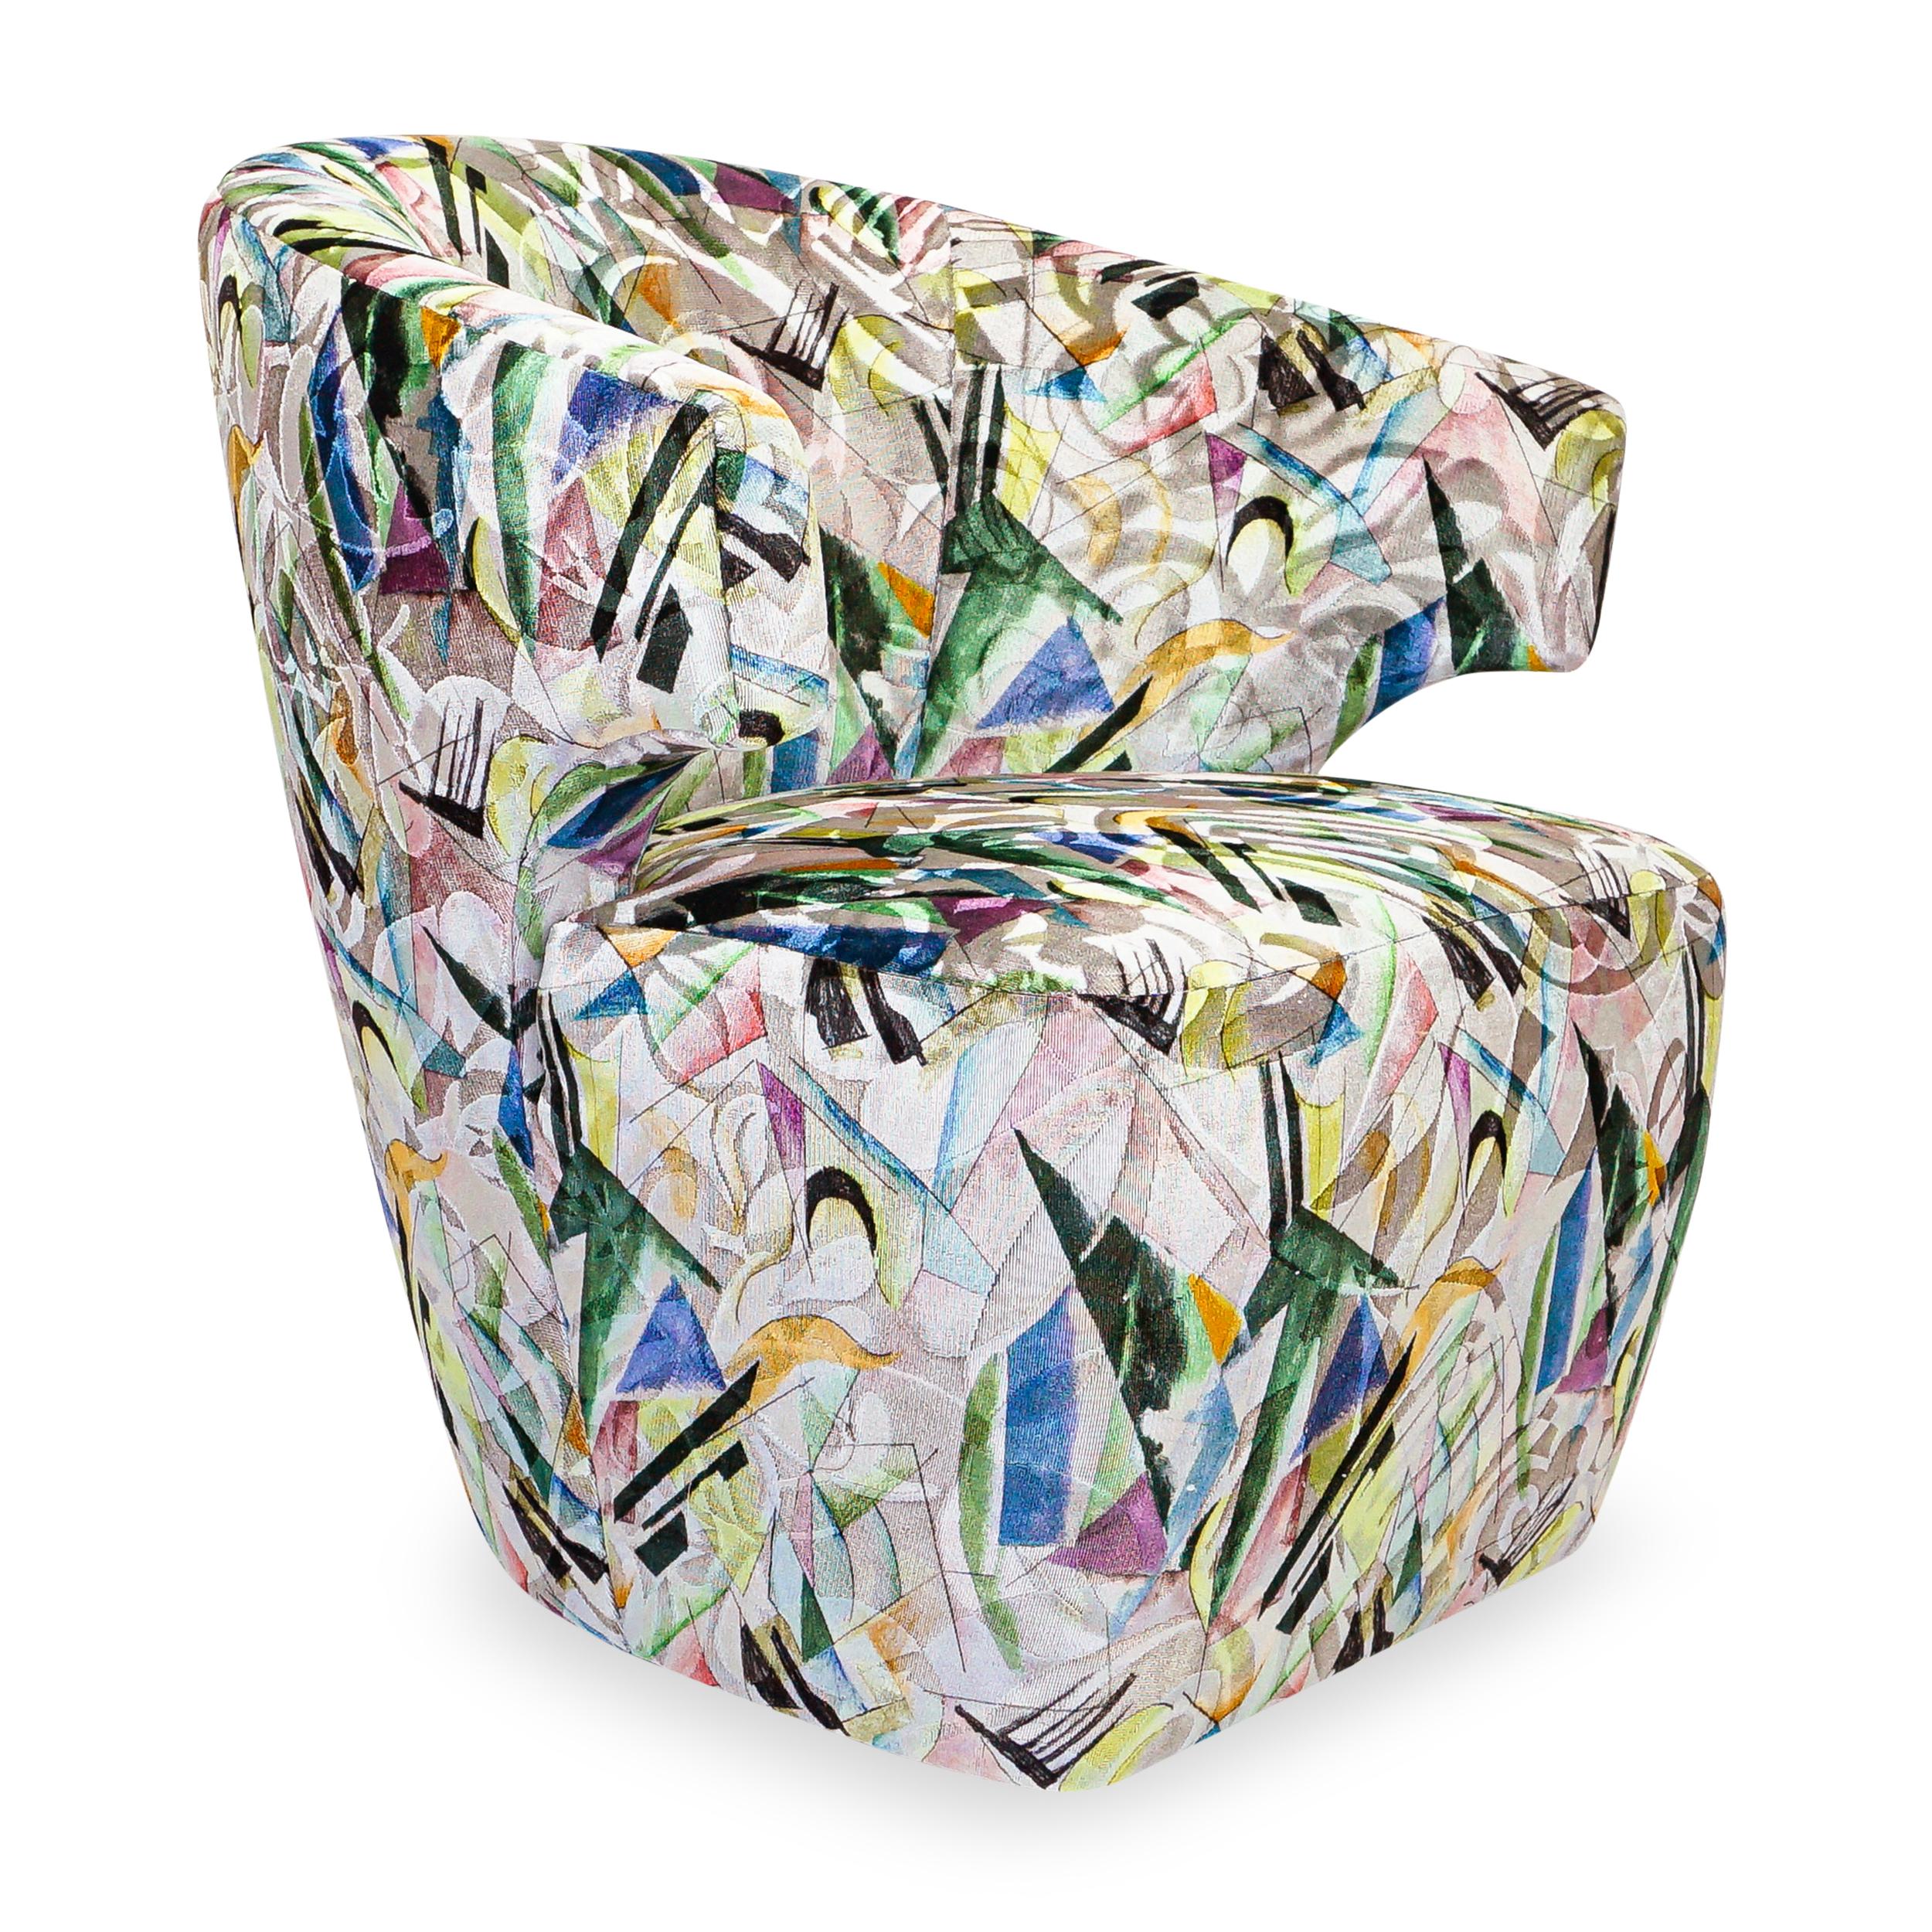 Featuring a popping bauhaus inspired cut and printed velvet, this winged swivel chair has a small stature but can comfortably seat taller and larger adults. The seat is firm and supportive and the slope of the back is 